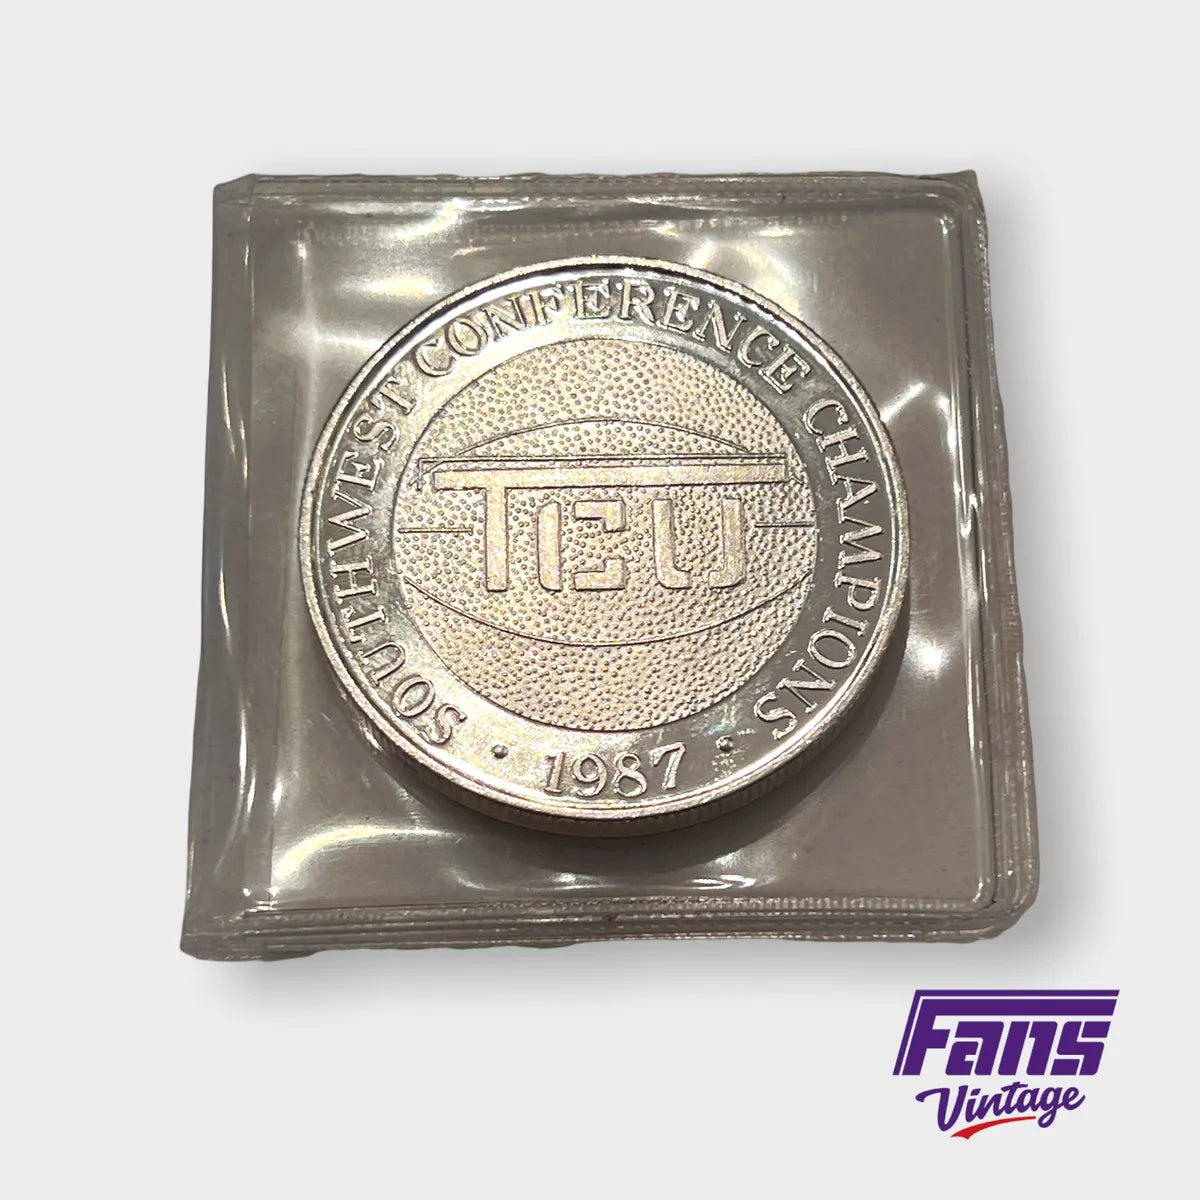 AMAZING! Vintage TCU Basketball Killer Frogs 1987 SWC Champs .999 Silver Commemorative Coin